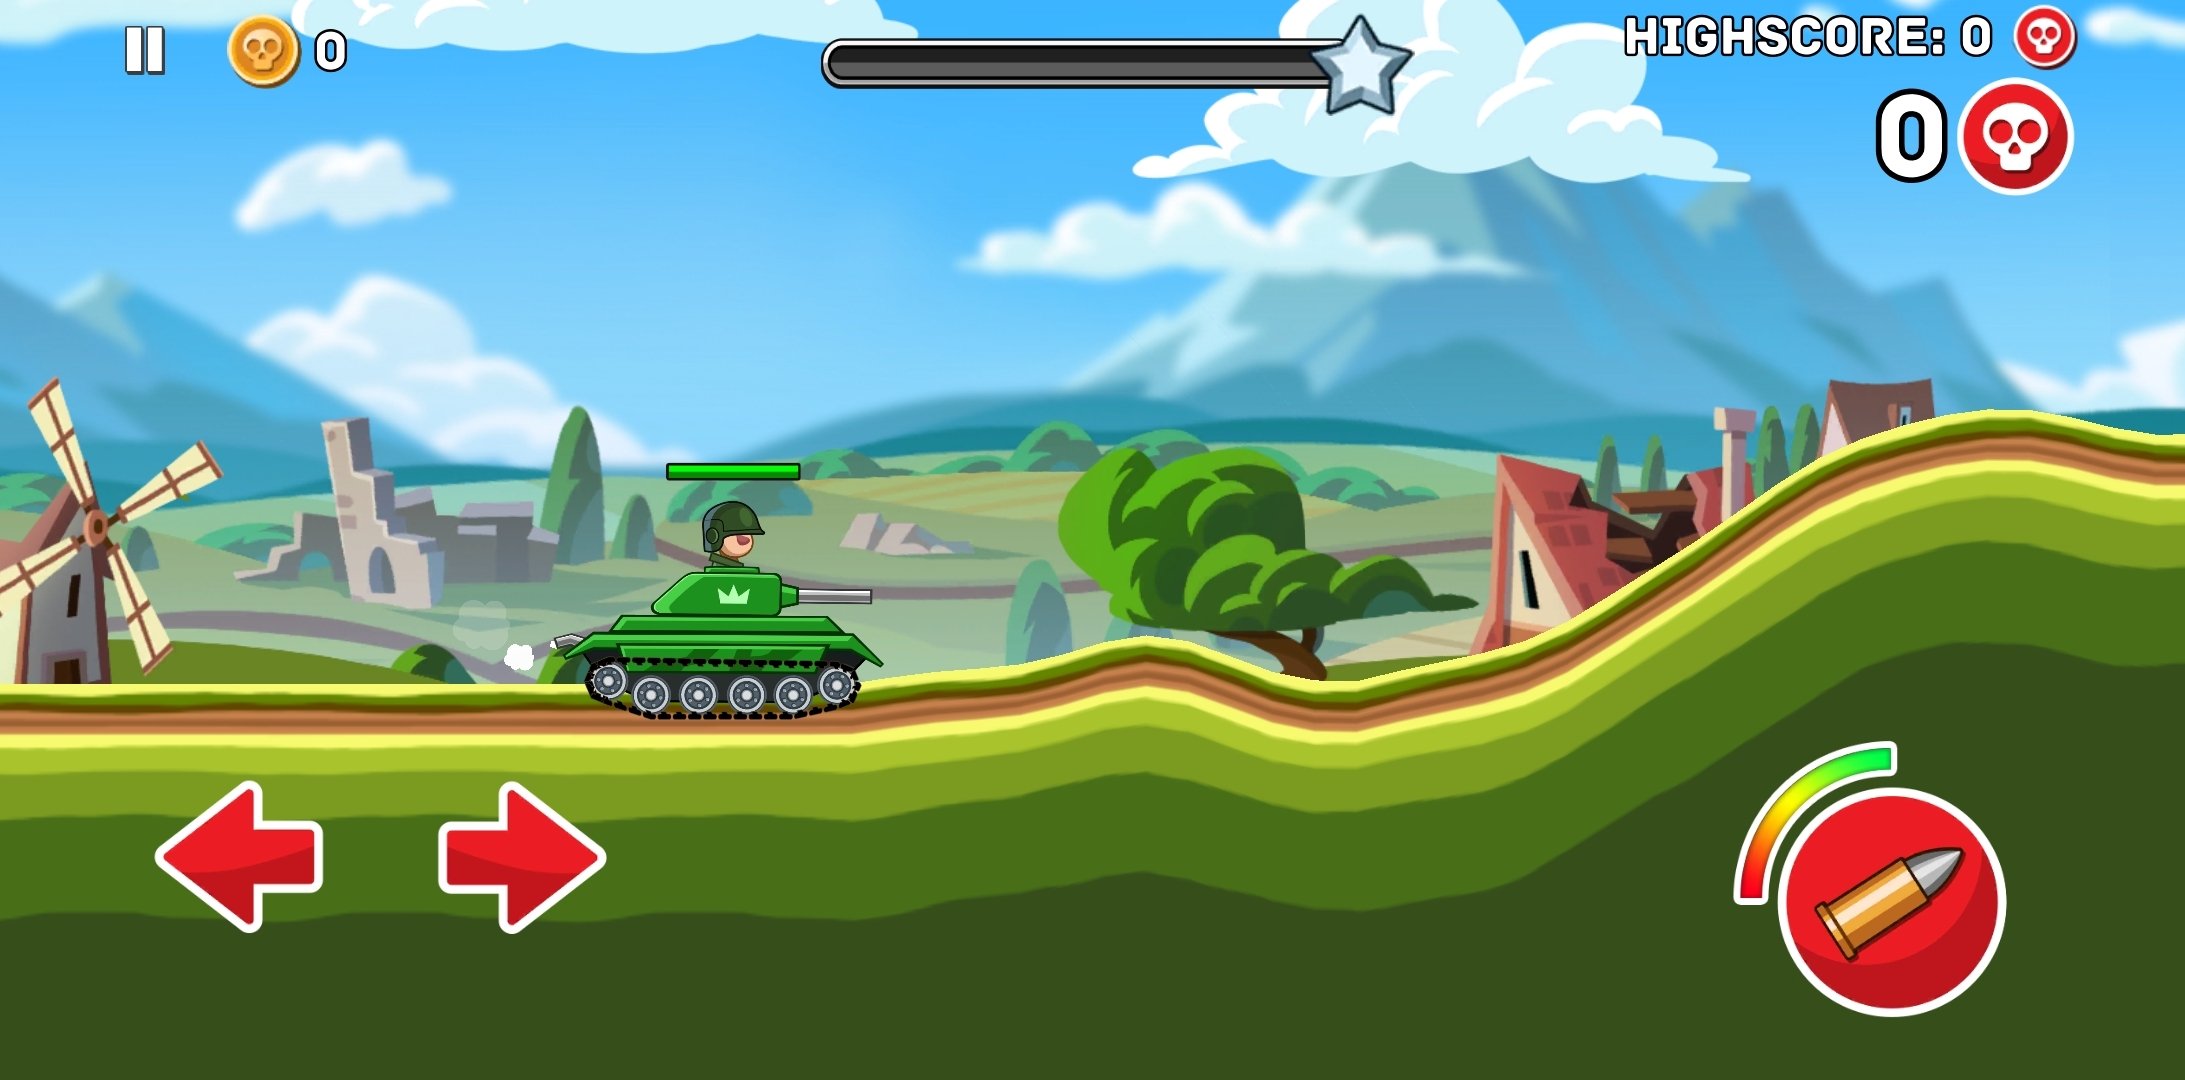 Tank Stars - Hills of Steel download the new version for ios